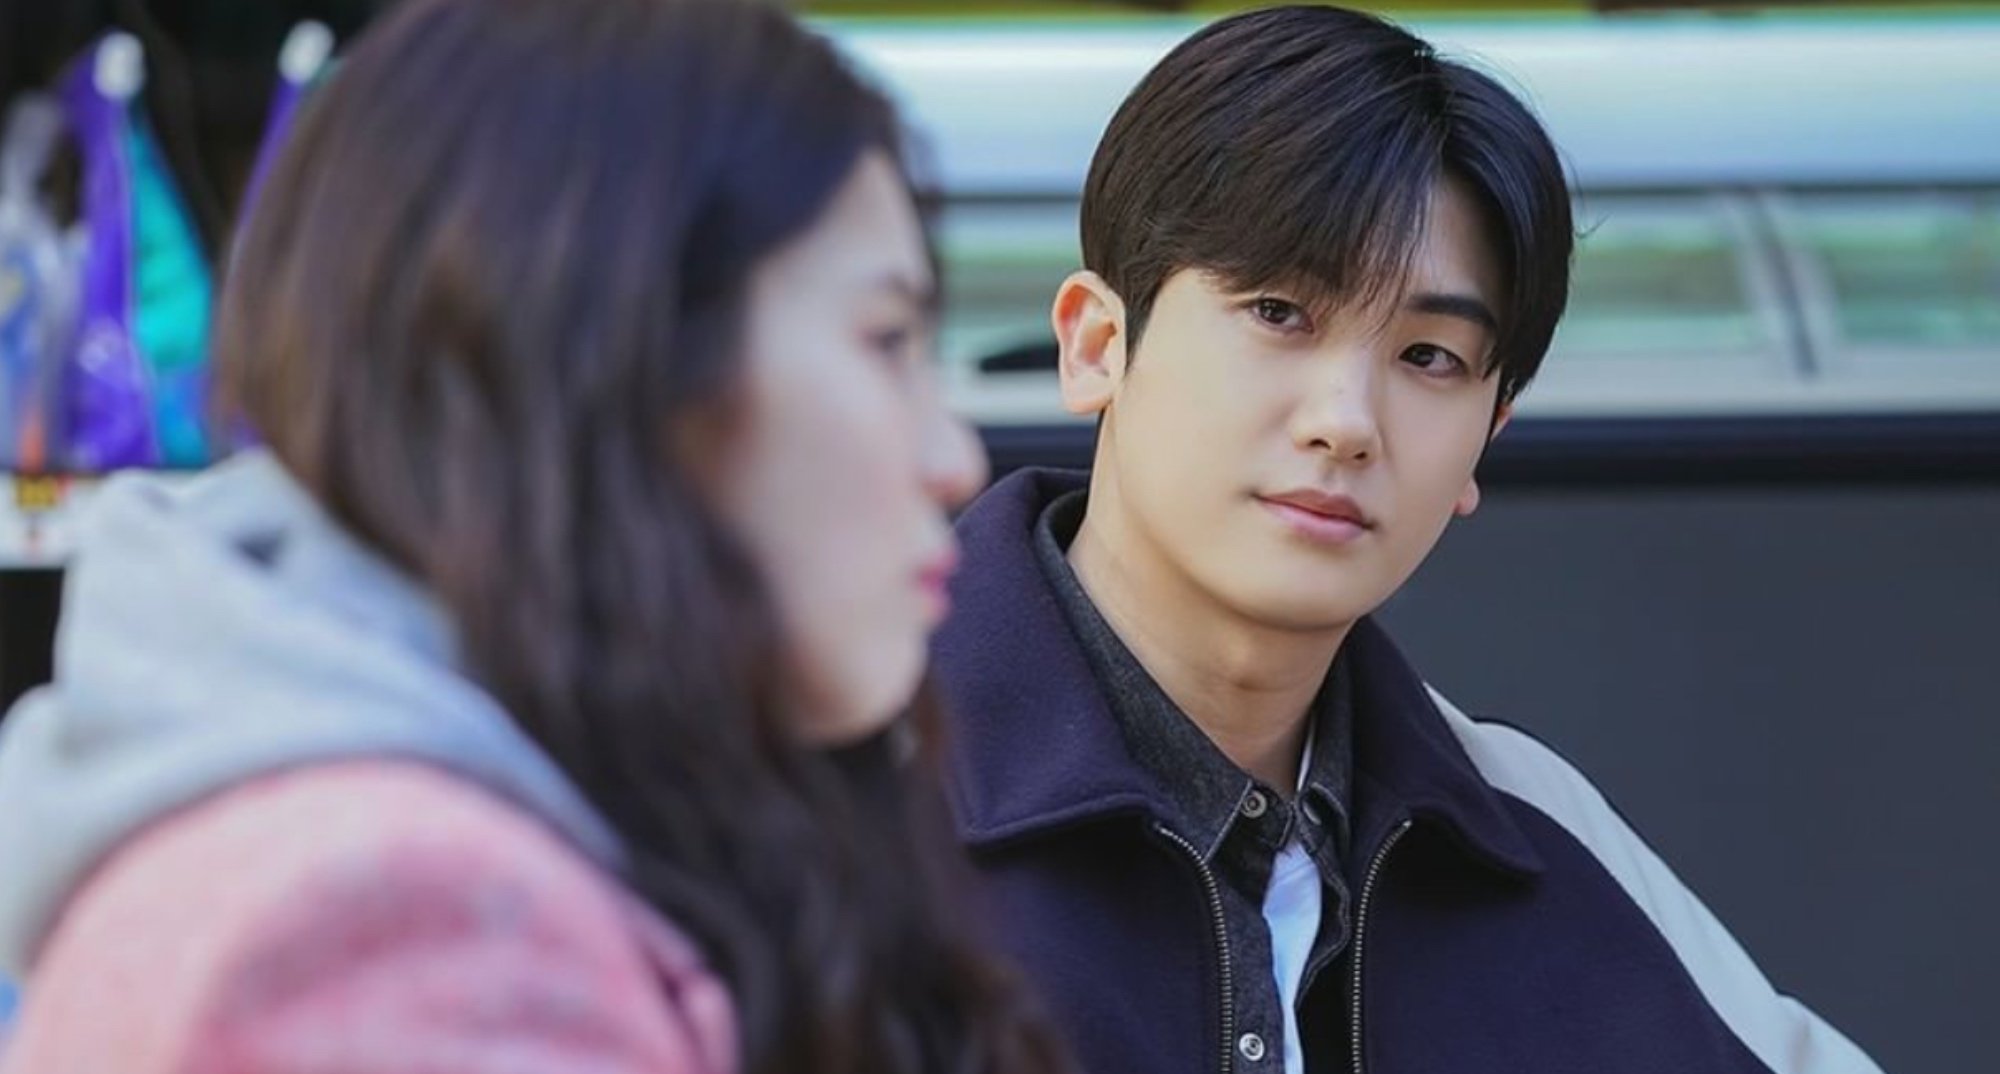 Park Hyung-sik and Han So-hee in 'Soundtrack #1' K-drama sitting in convenience store.